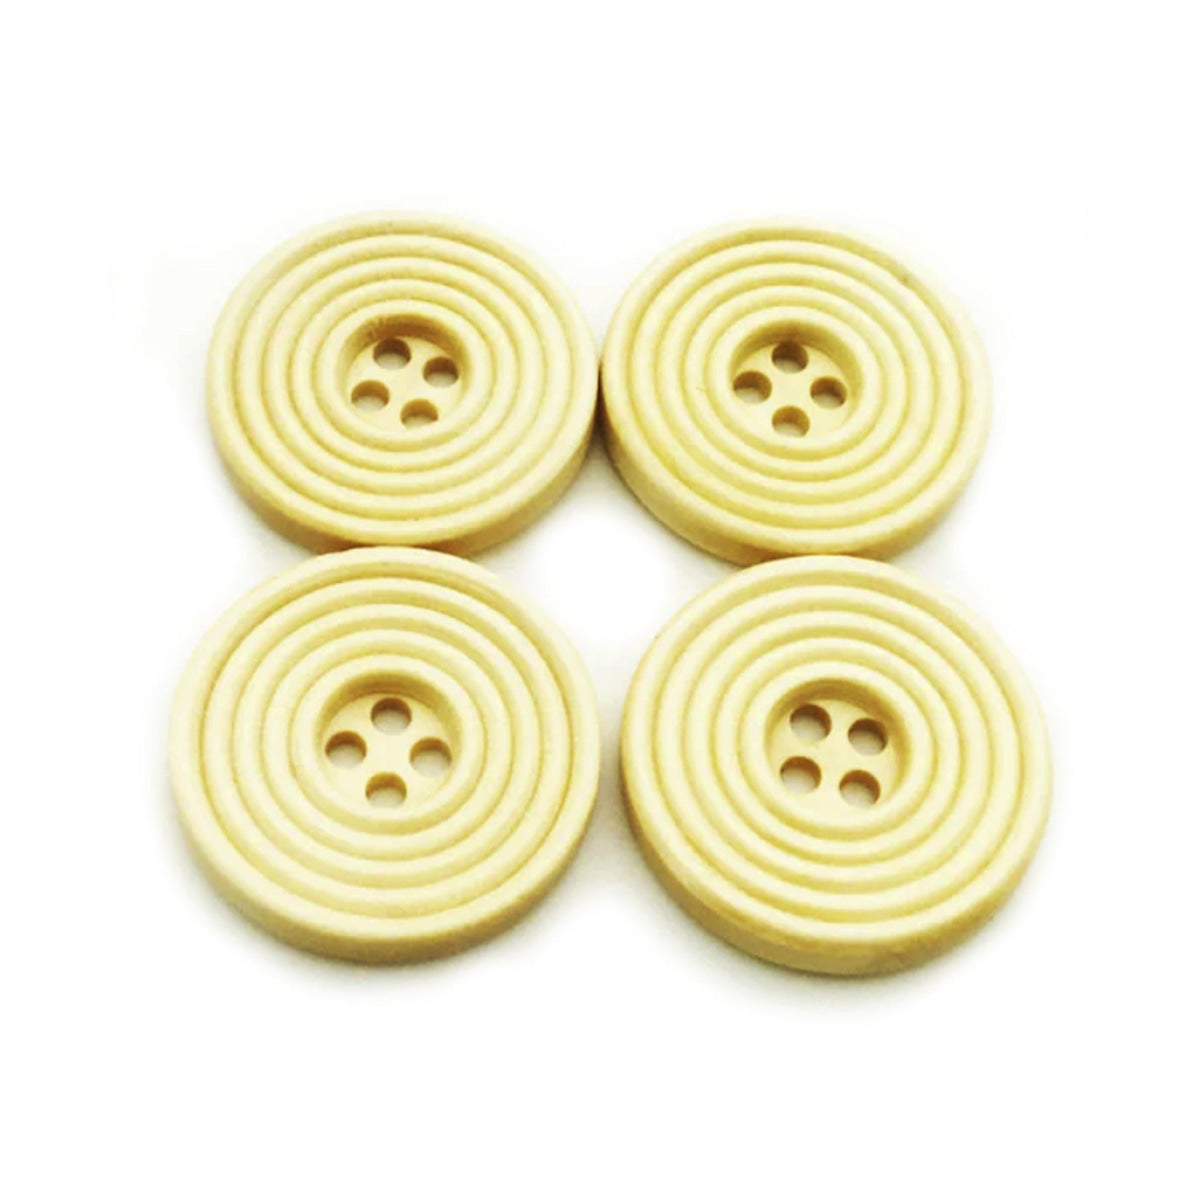 7Pcs White/brown Ringed Wooden Extra Large Buttons 30Mm 4-Hole Round Sewing Diy White Clothing